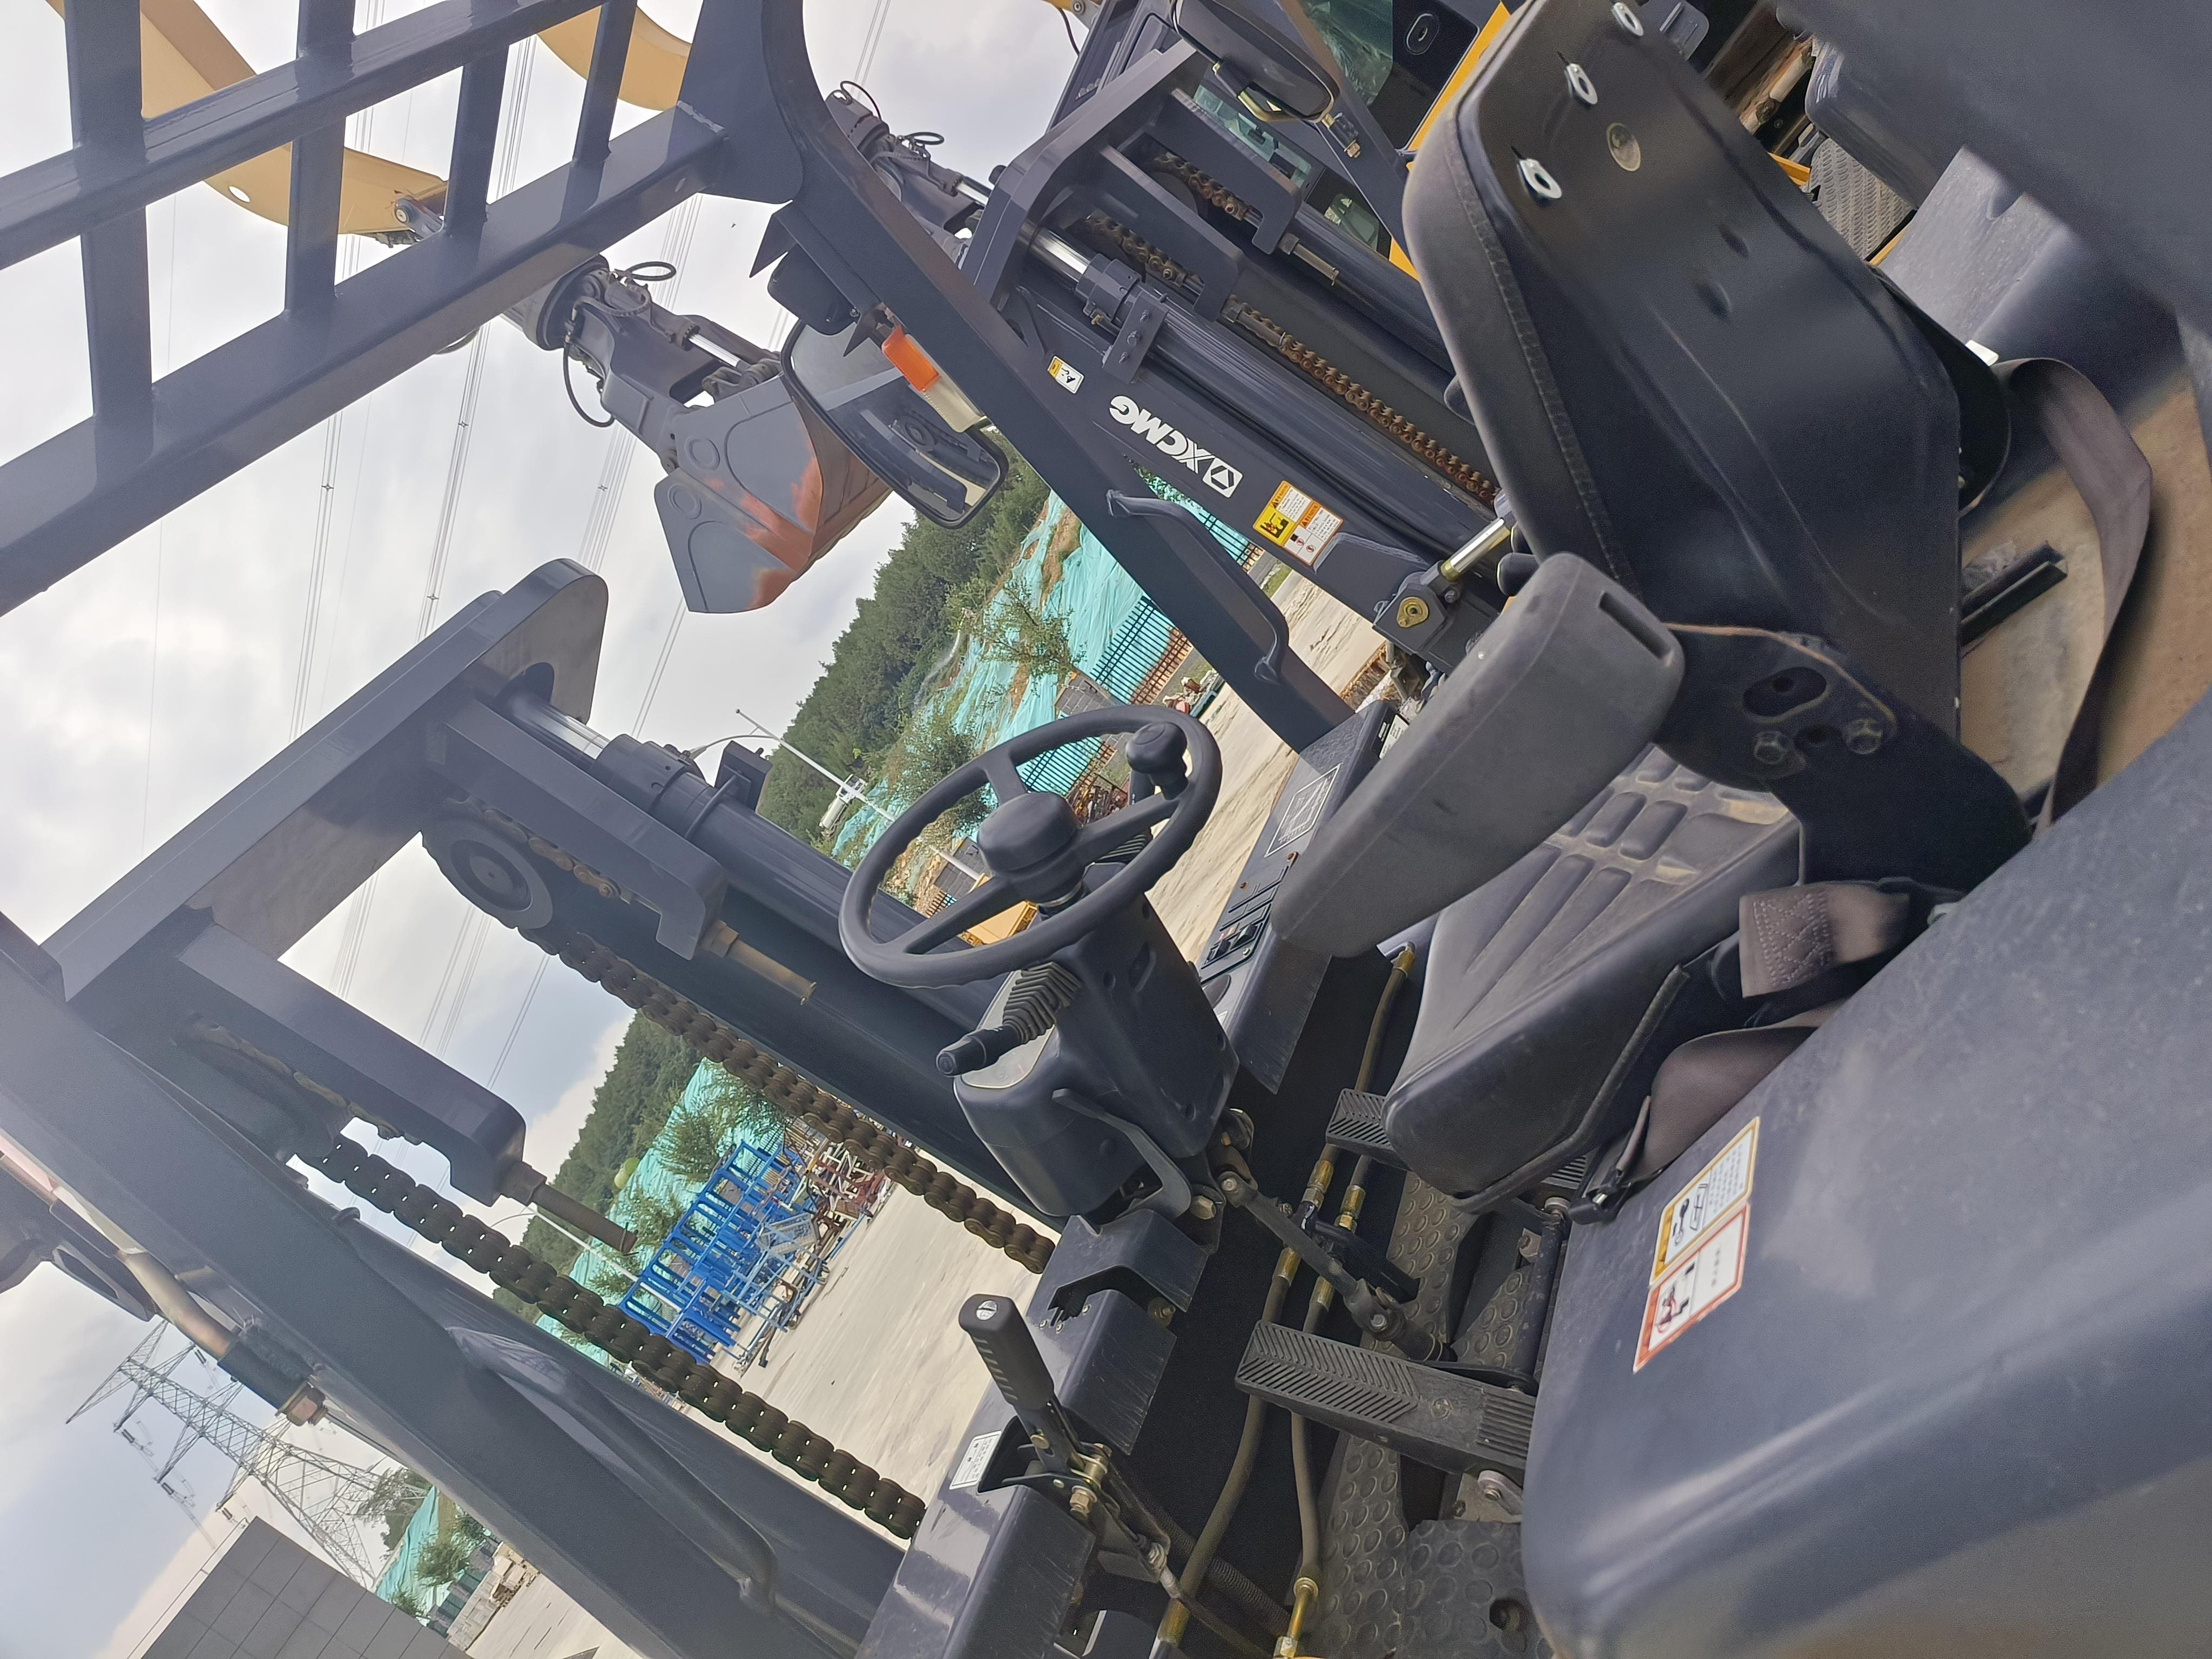 XCMG XCF1006K internal combustion counterweight forklift